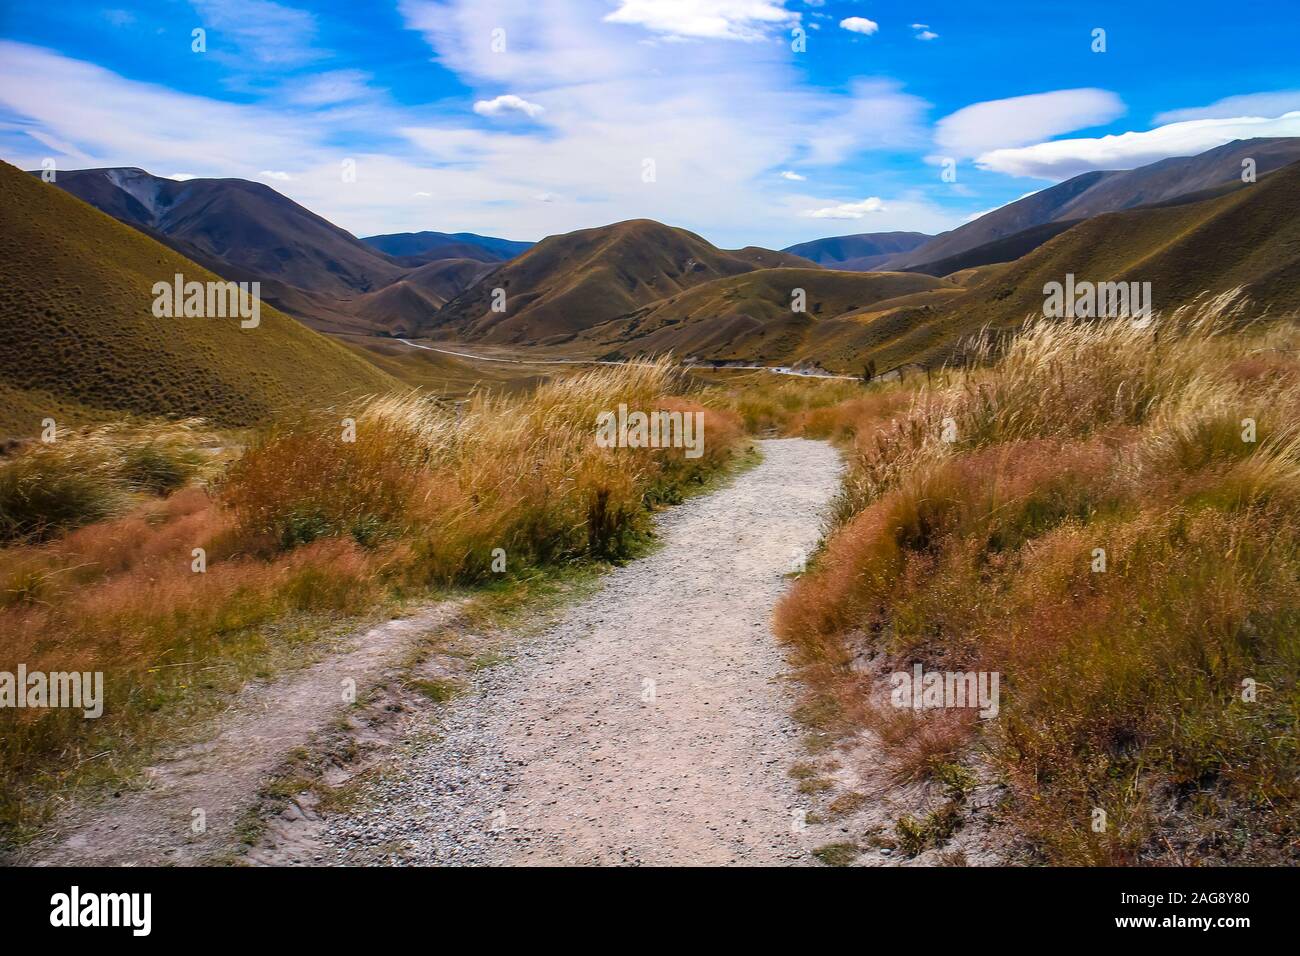 A footpath leads through a beautiful hilly landscape with dry vegetation under a blue sky, seen in Canterbury, New Zealand South Island. Stock Photo